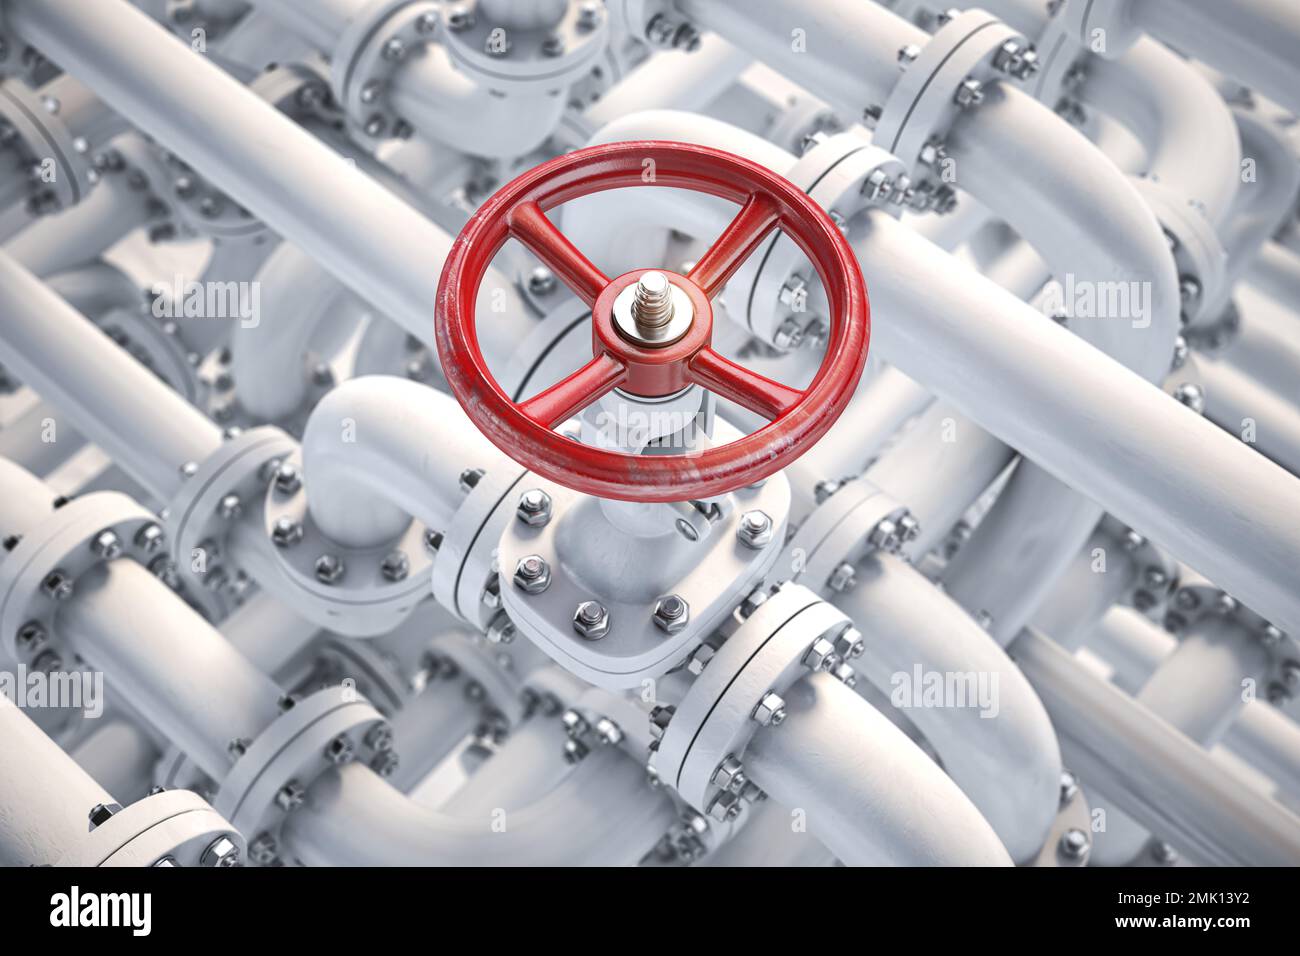 Oil or gas pipe line valve. Oil and gas control, extraction, production and transportation industrial background. 3d illustration Stock Photo